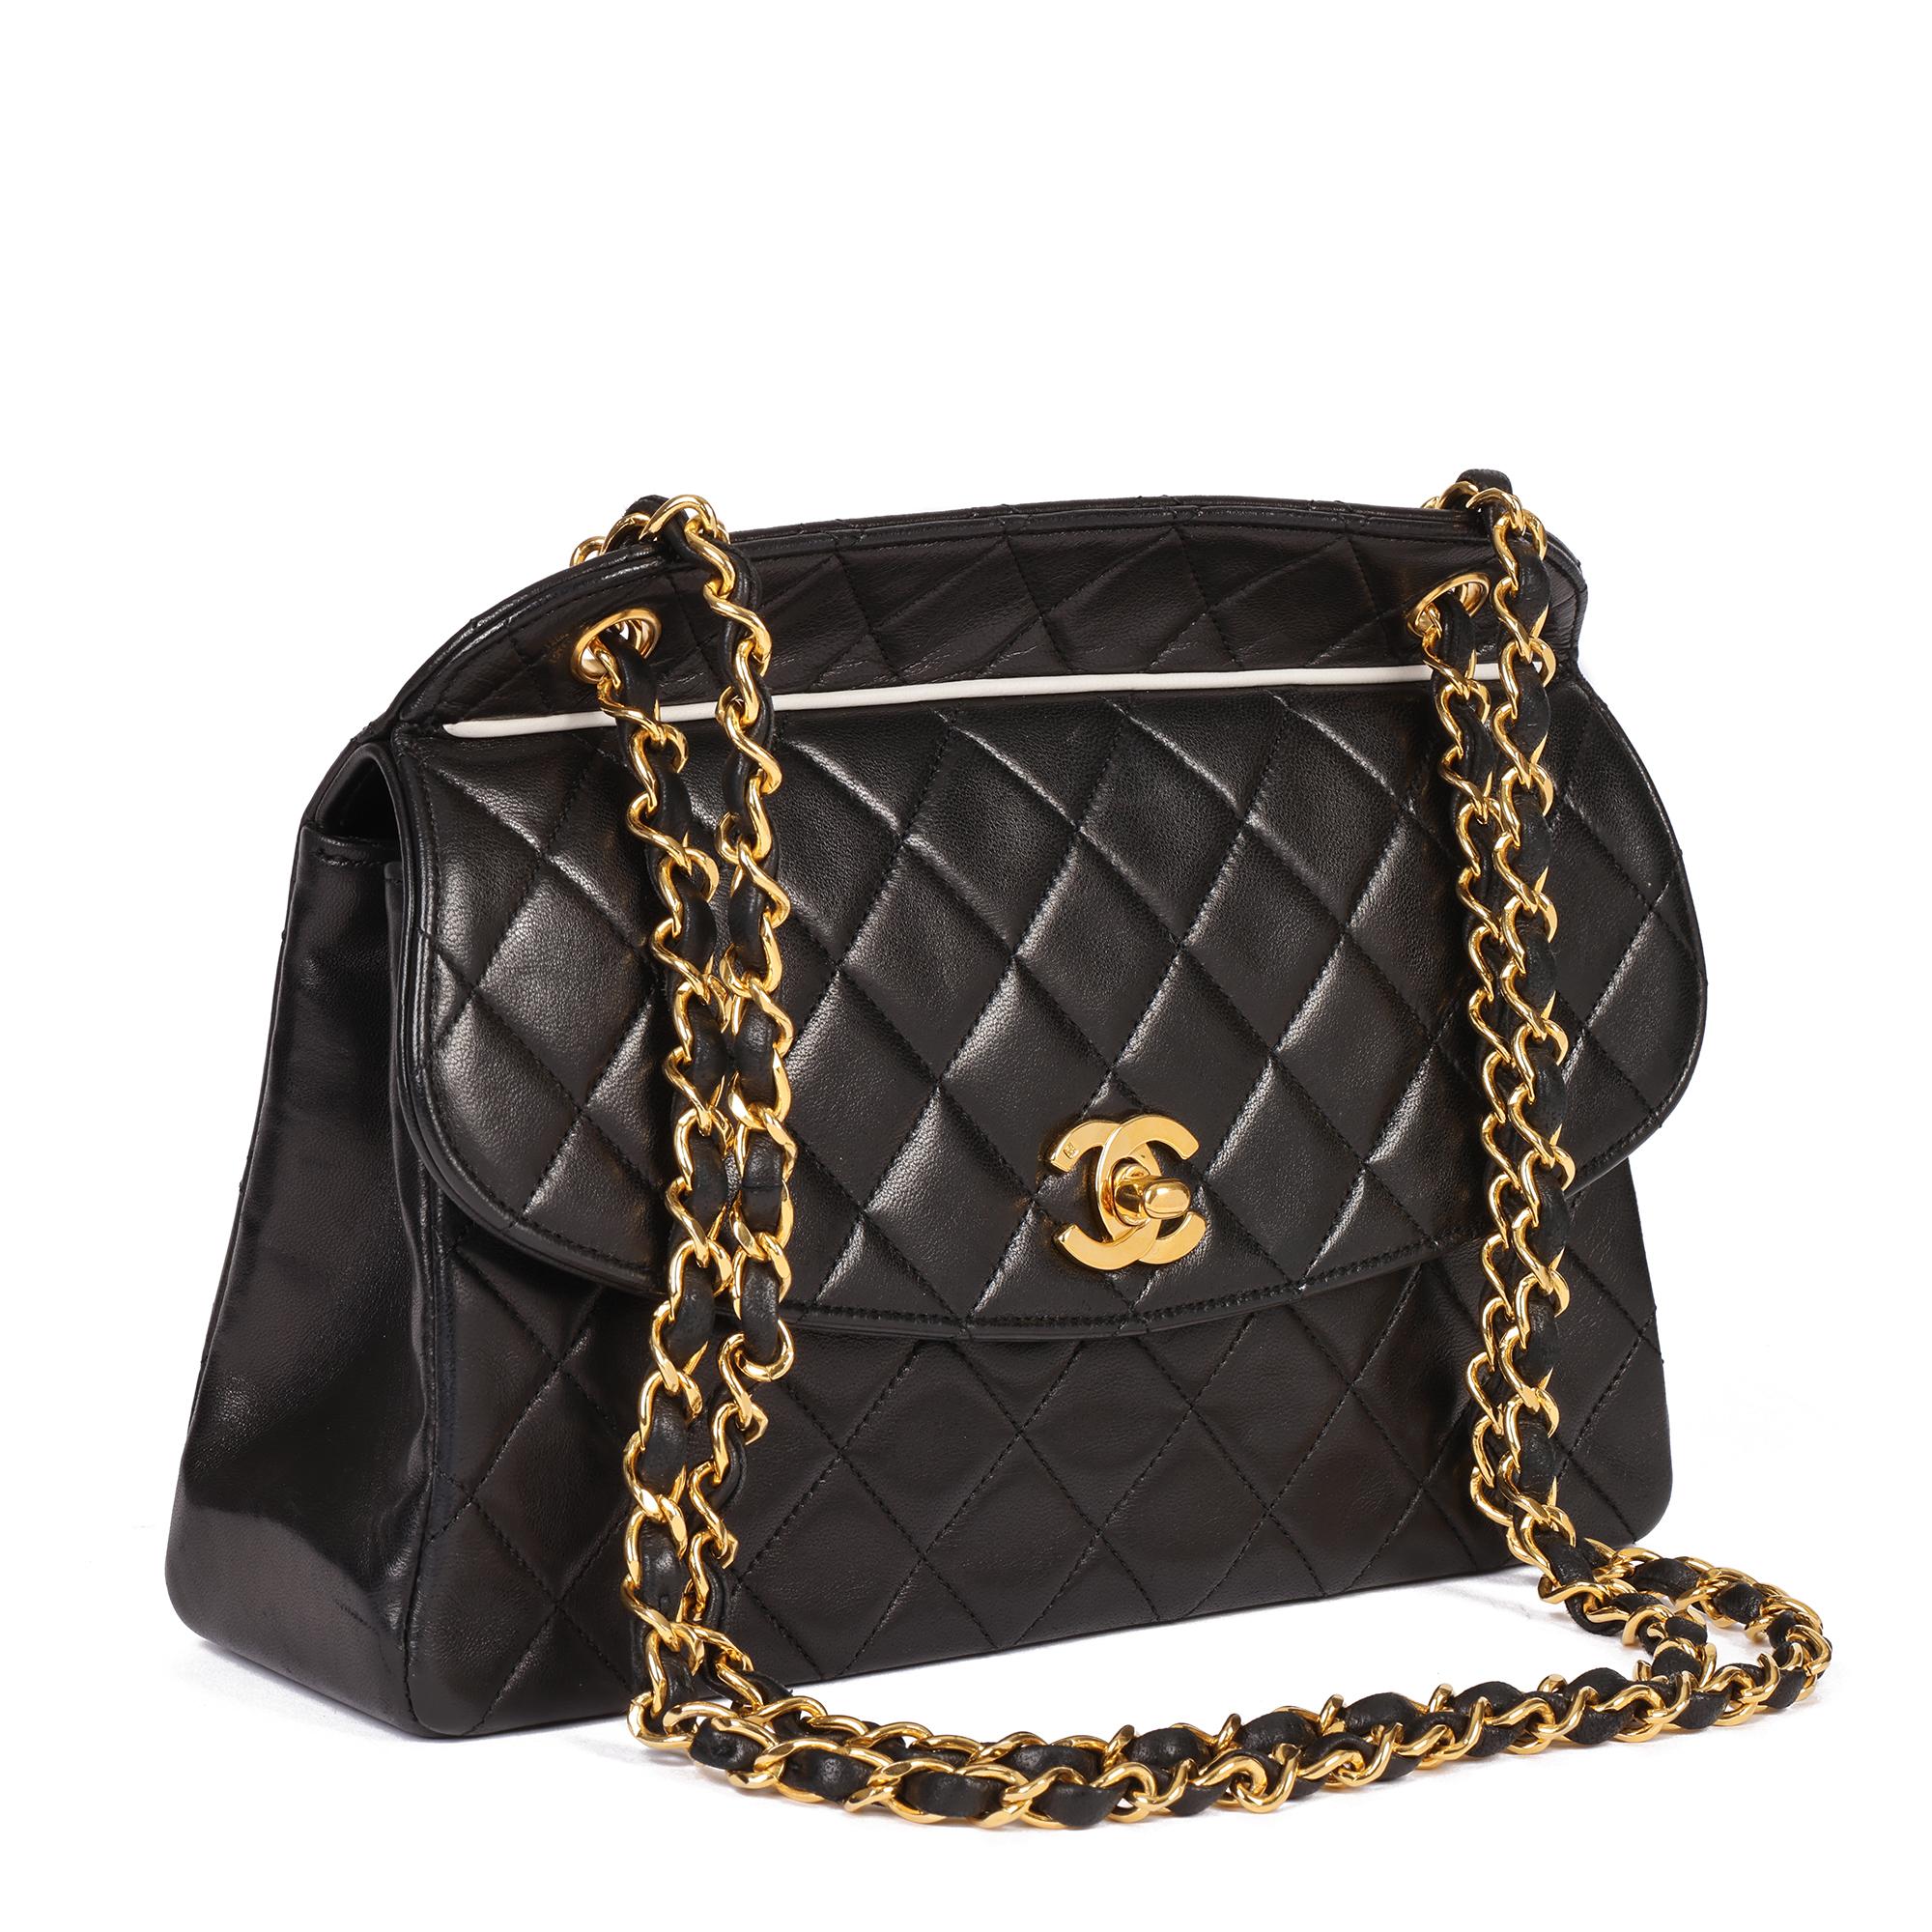 CHANEL
Black Quilted Lambskin & White Trim Vintage Medium Classic Single Flap Bag with Wallet

Xupes Reference: HB4814
Serial Number: 1510560
Age (Circa): 1990
Accompanied By: Authenticity Card, Wallet
Authenticity Details: Authenticity Card, Serial